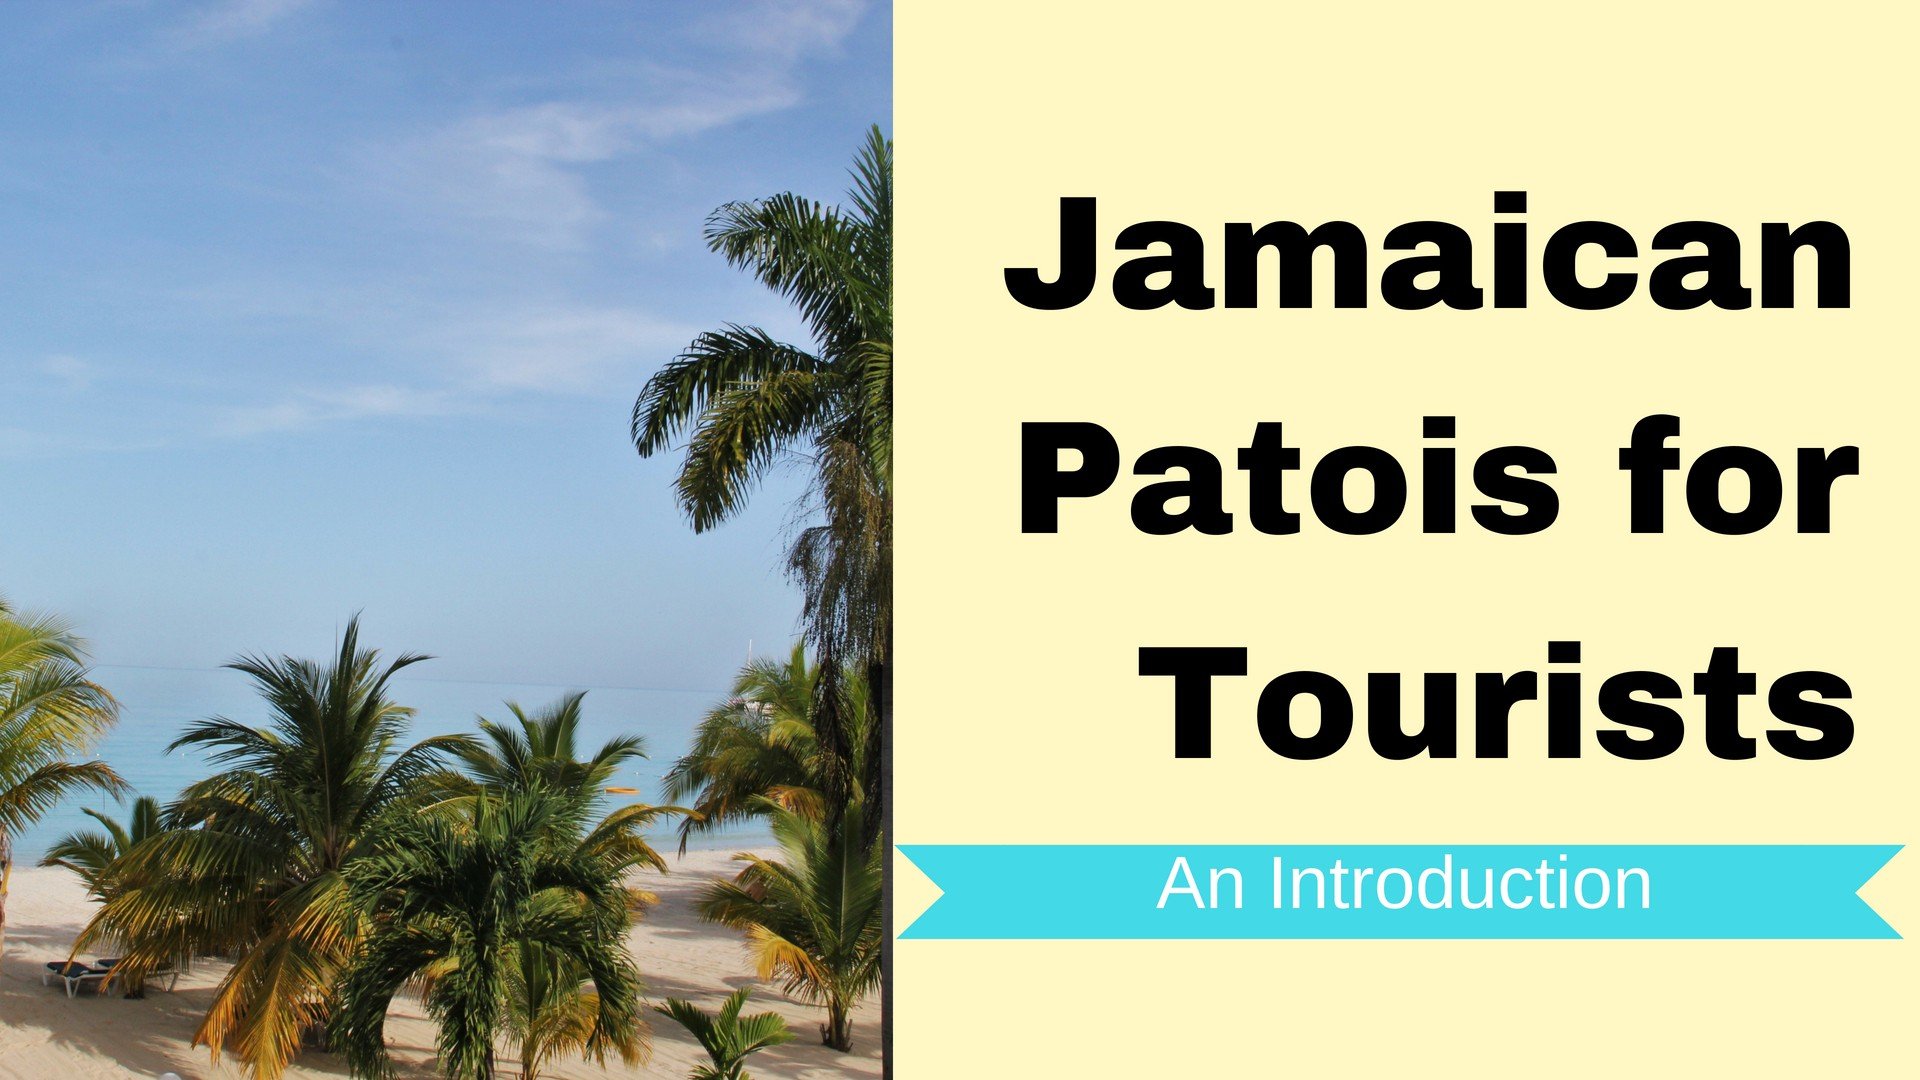 Jamaican patois dictionary free download